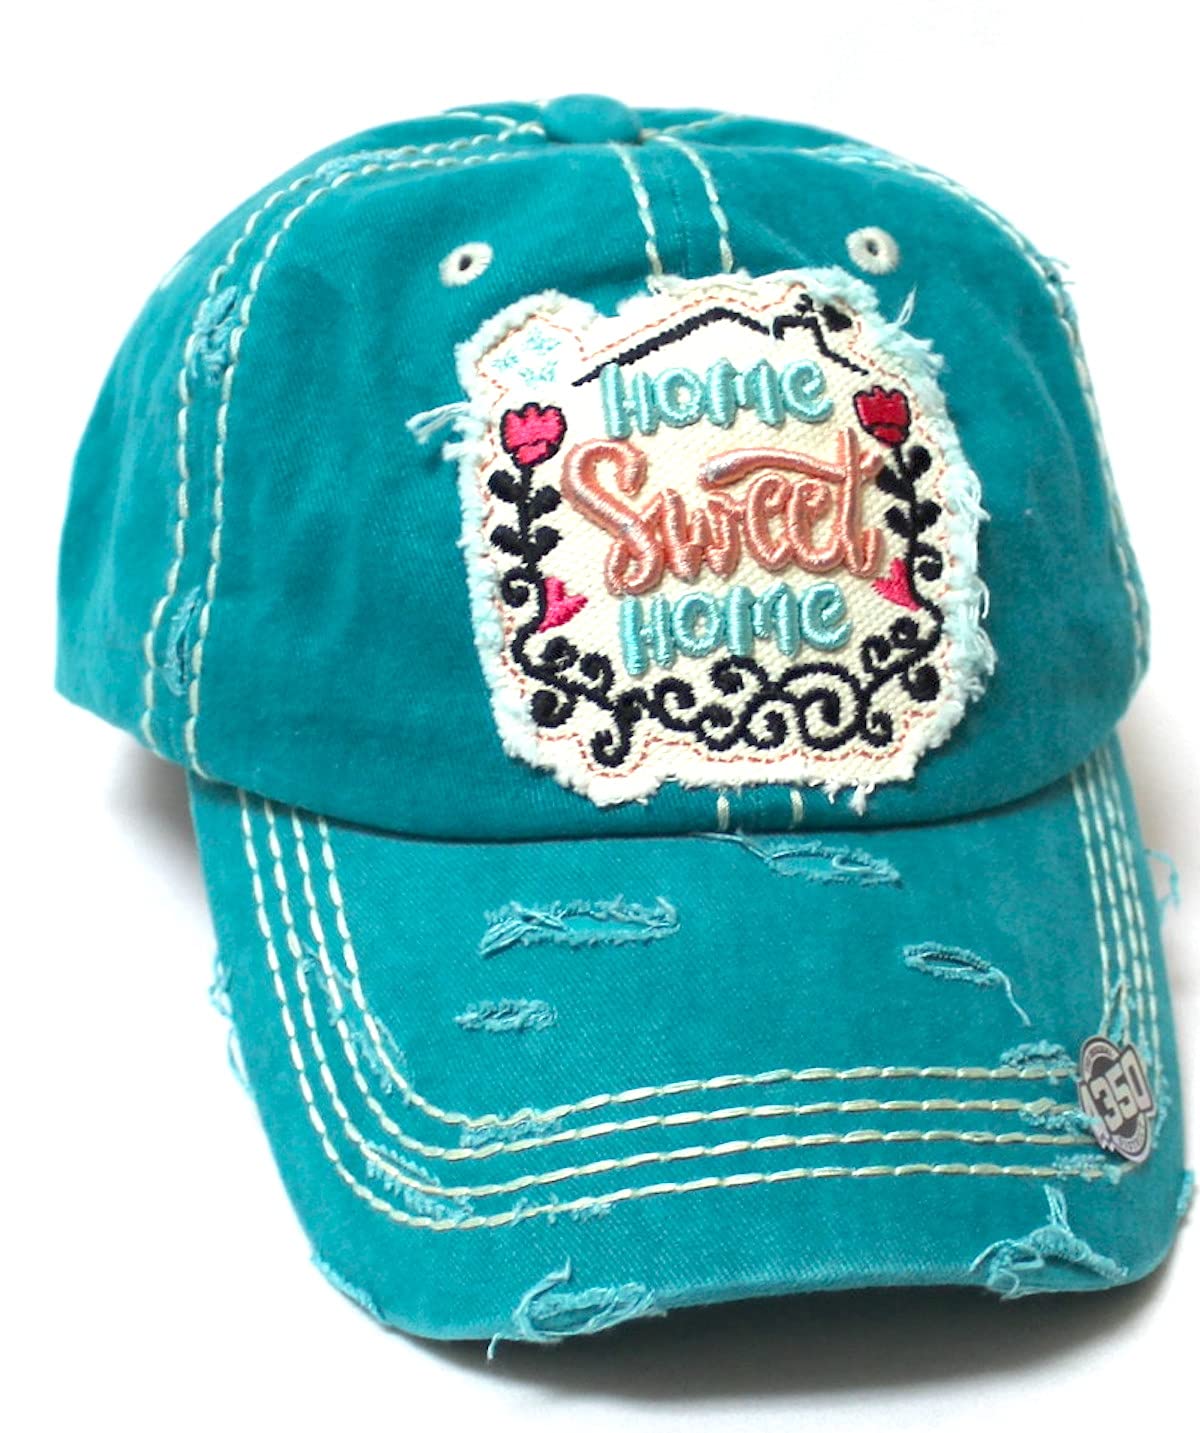 CAPS 'N VINTAGE Women's Adjustable Ballcap Home Sweet Home Patch Embroidery Monogram Hat